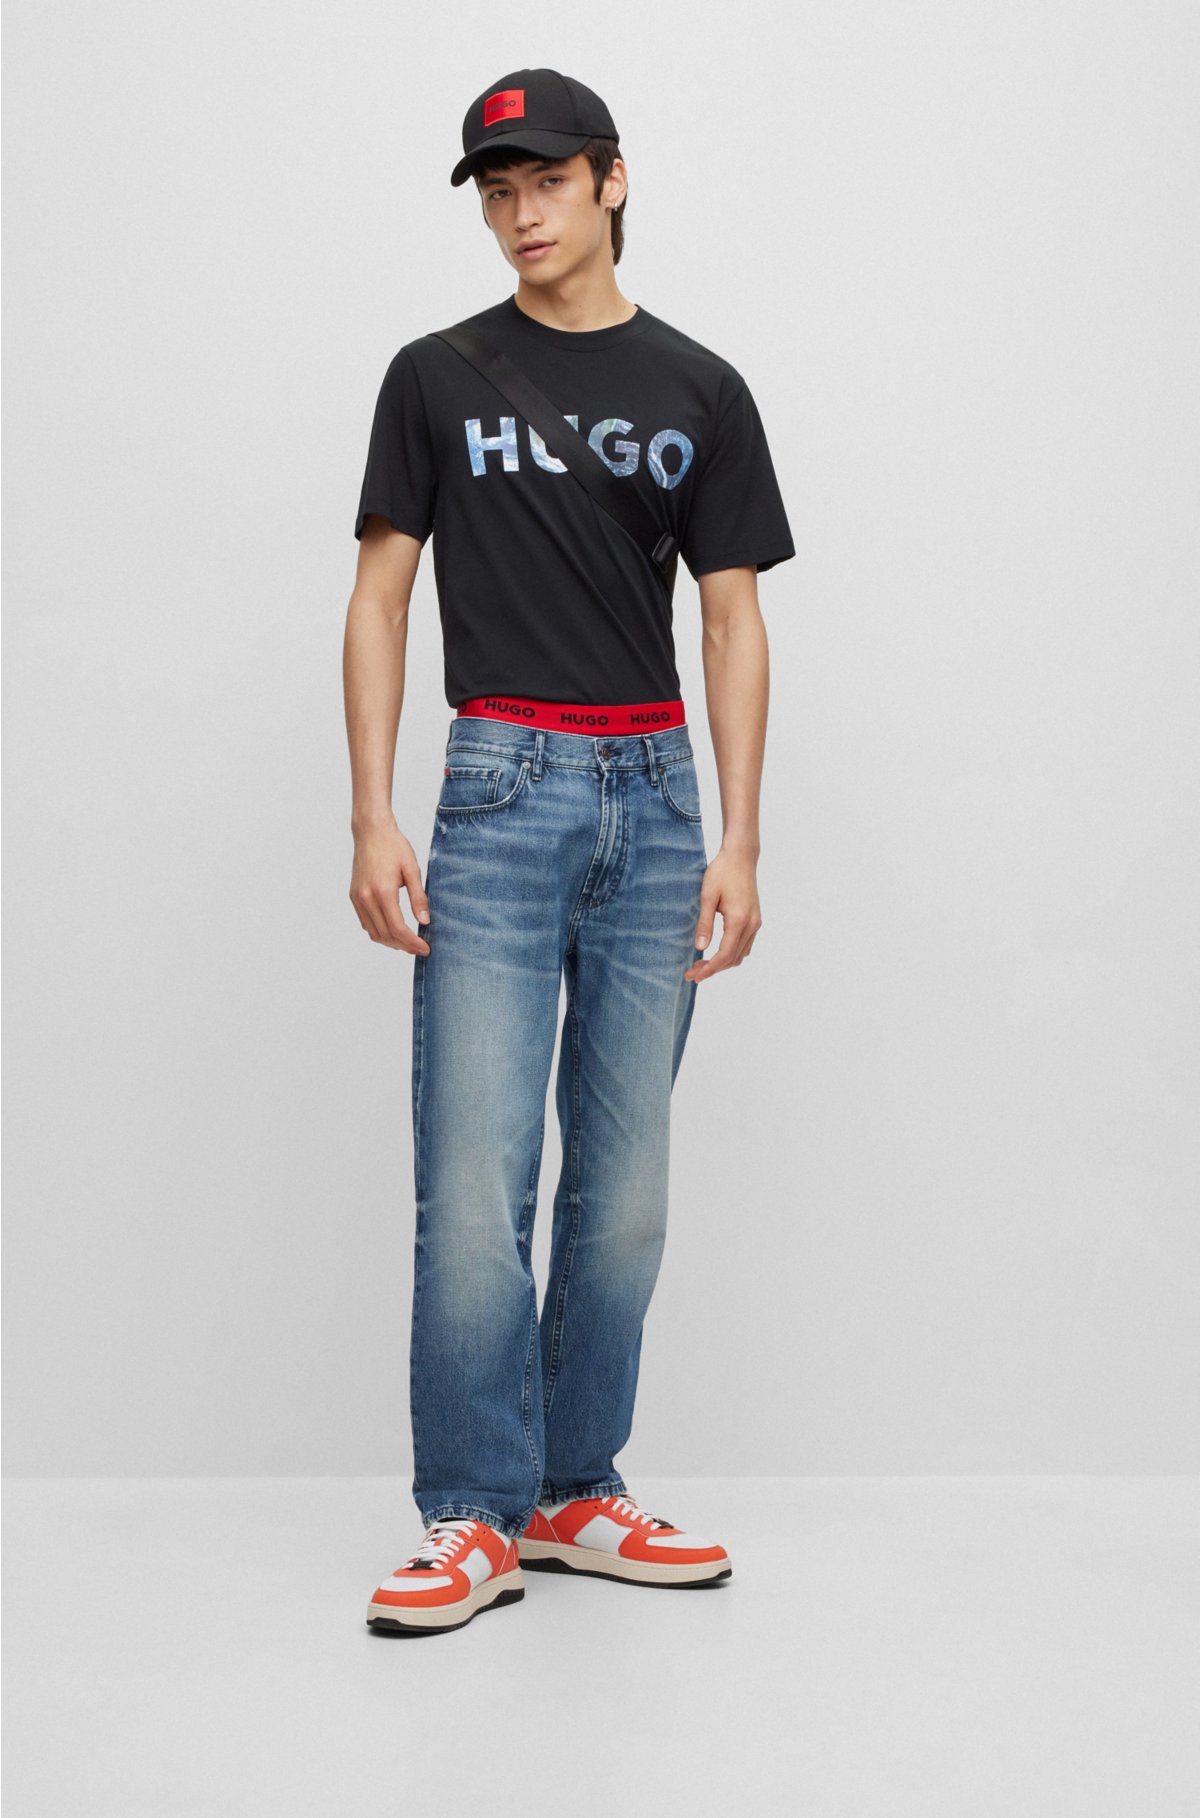 T-shirt and logo Cotton-jersey slogan HUGO with -